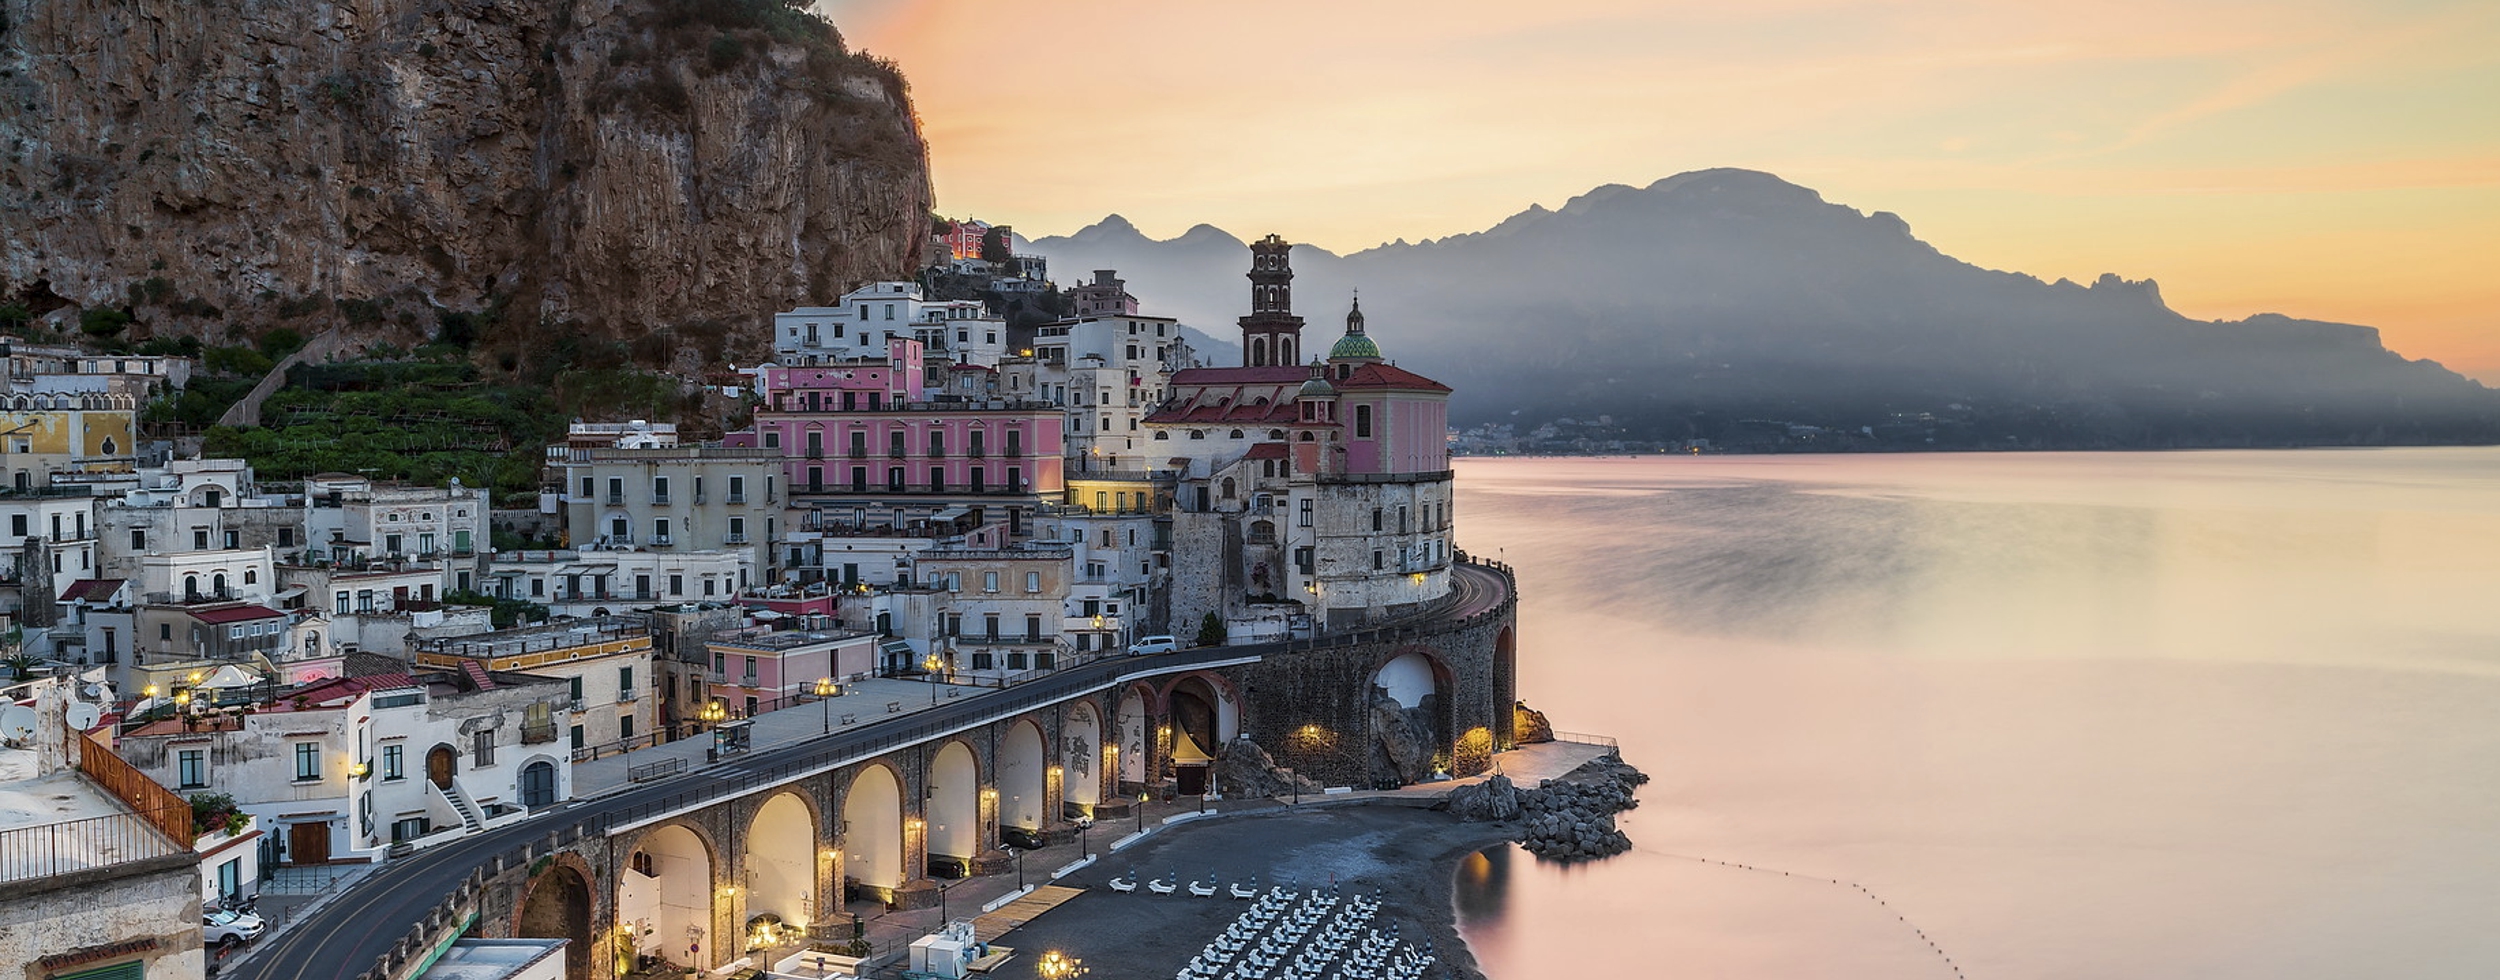 A practice guide about what to do and see in Atrani| Amalfi Coast